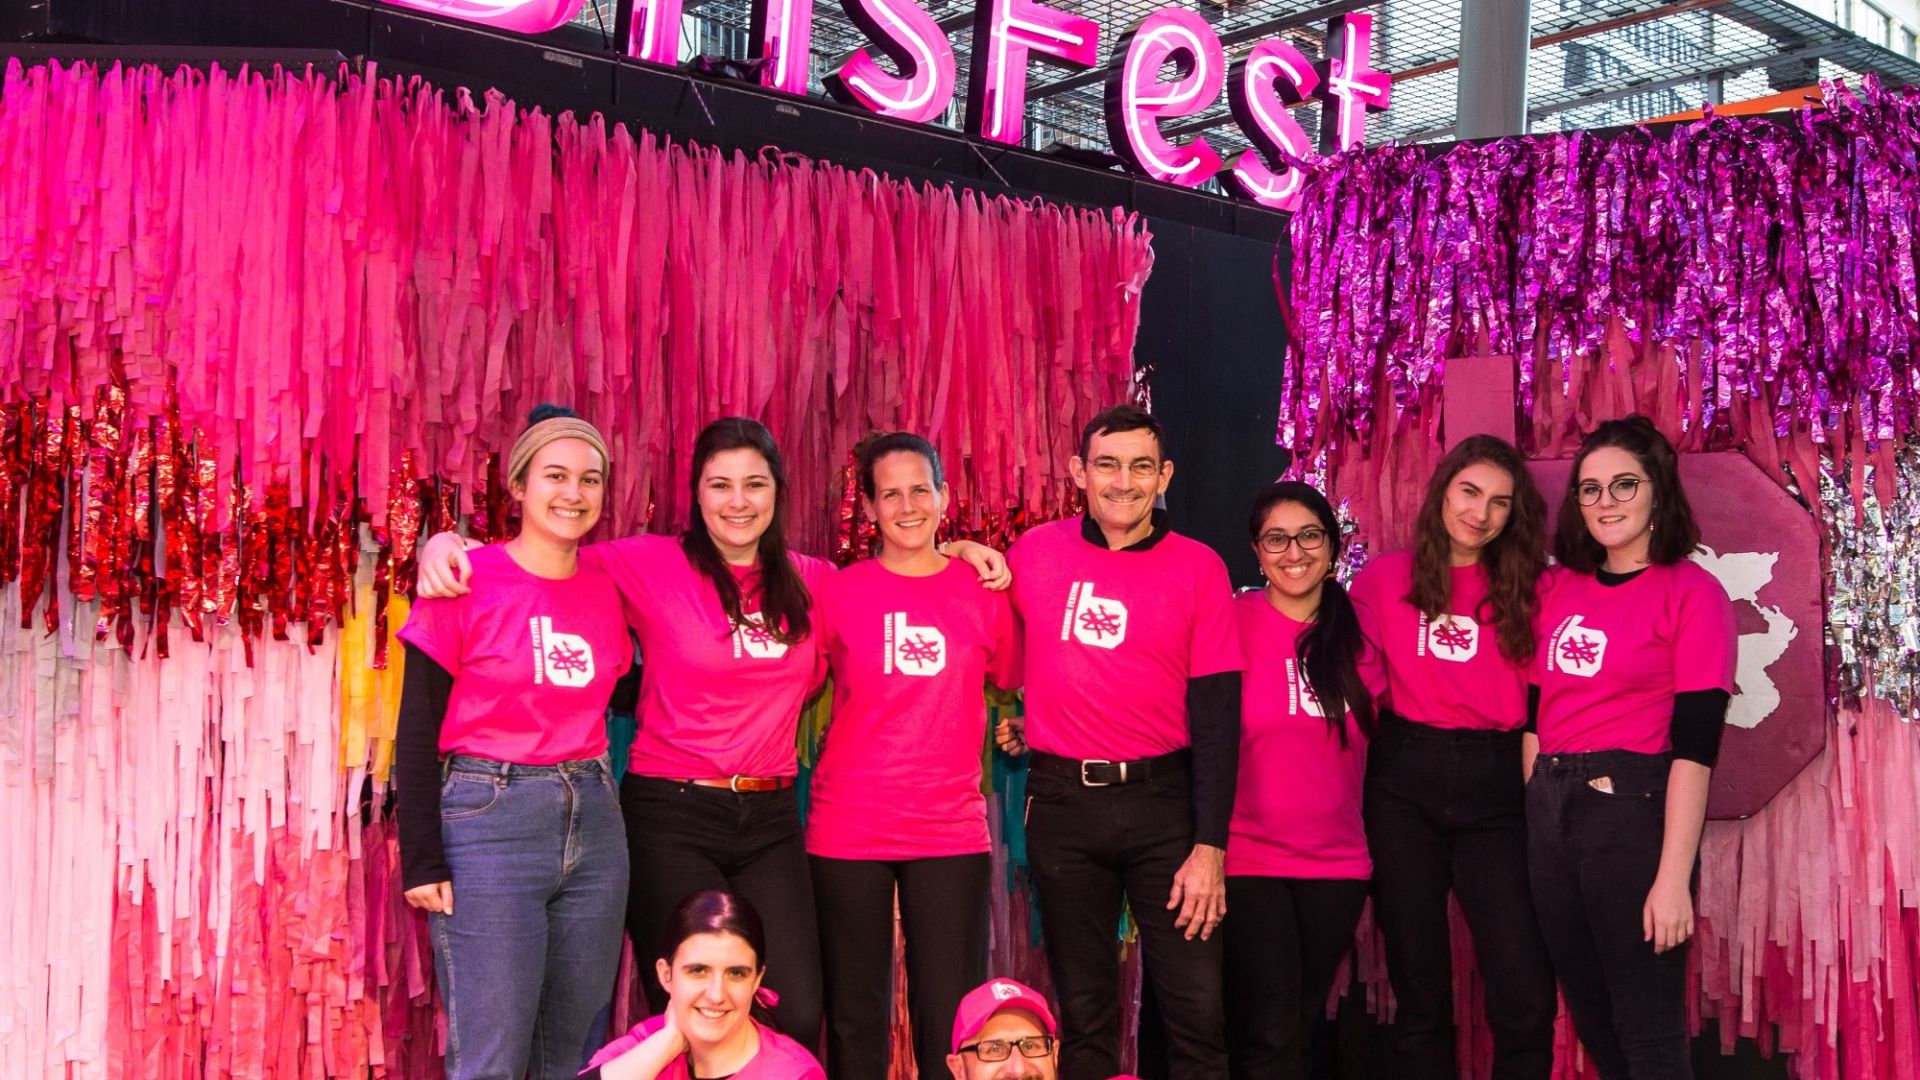 A group of people in pink Brisbane Festival shirts in front of a large pink tassel backdrop and "#BrisFest" light installation.